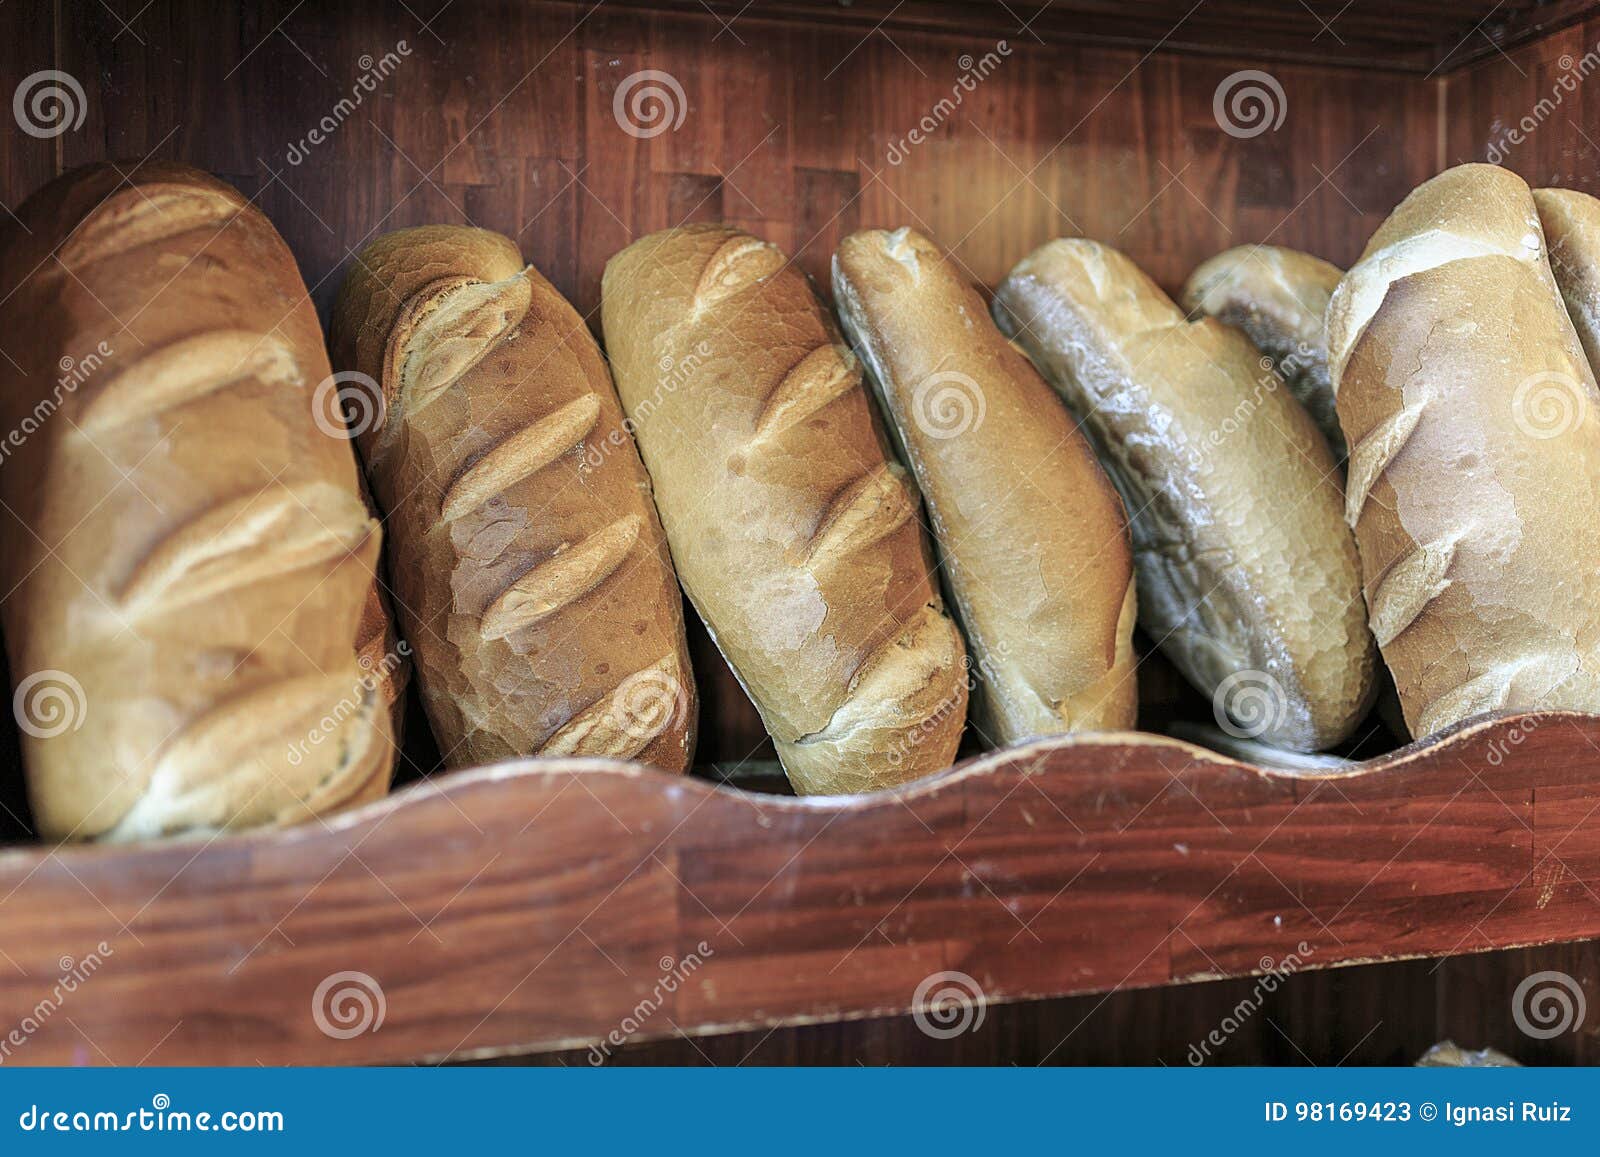 group of bread in a backery